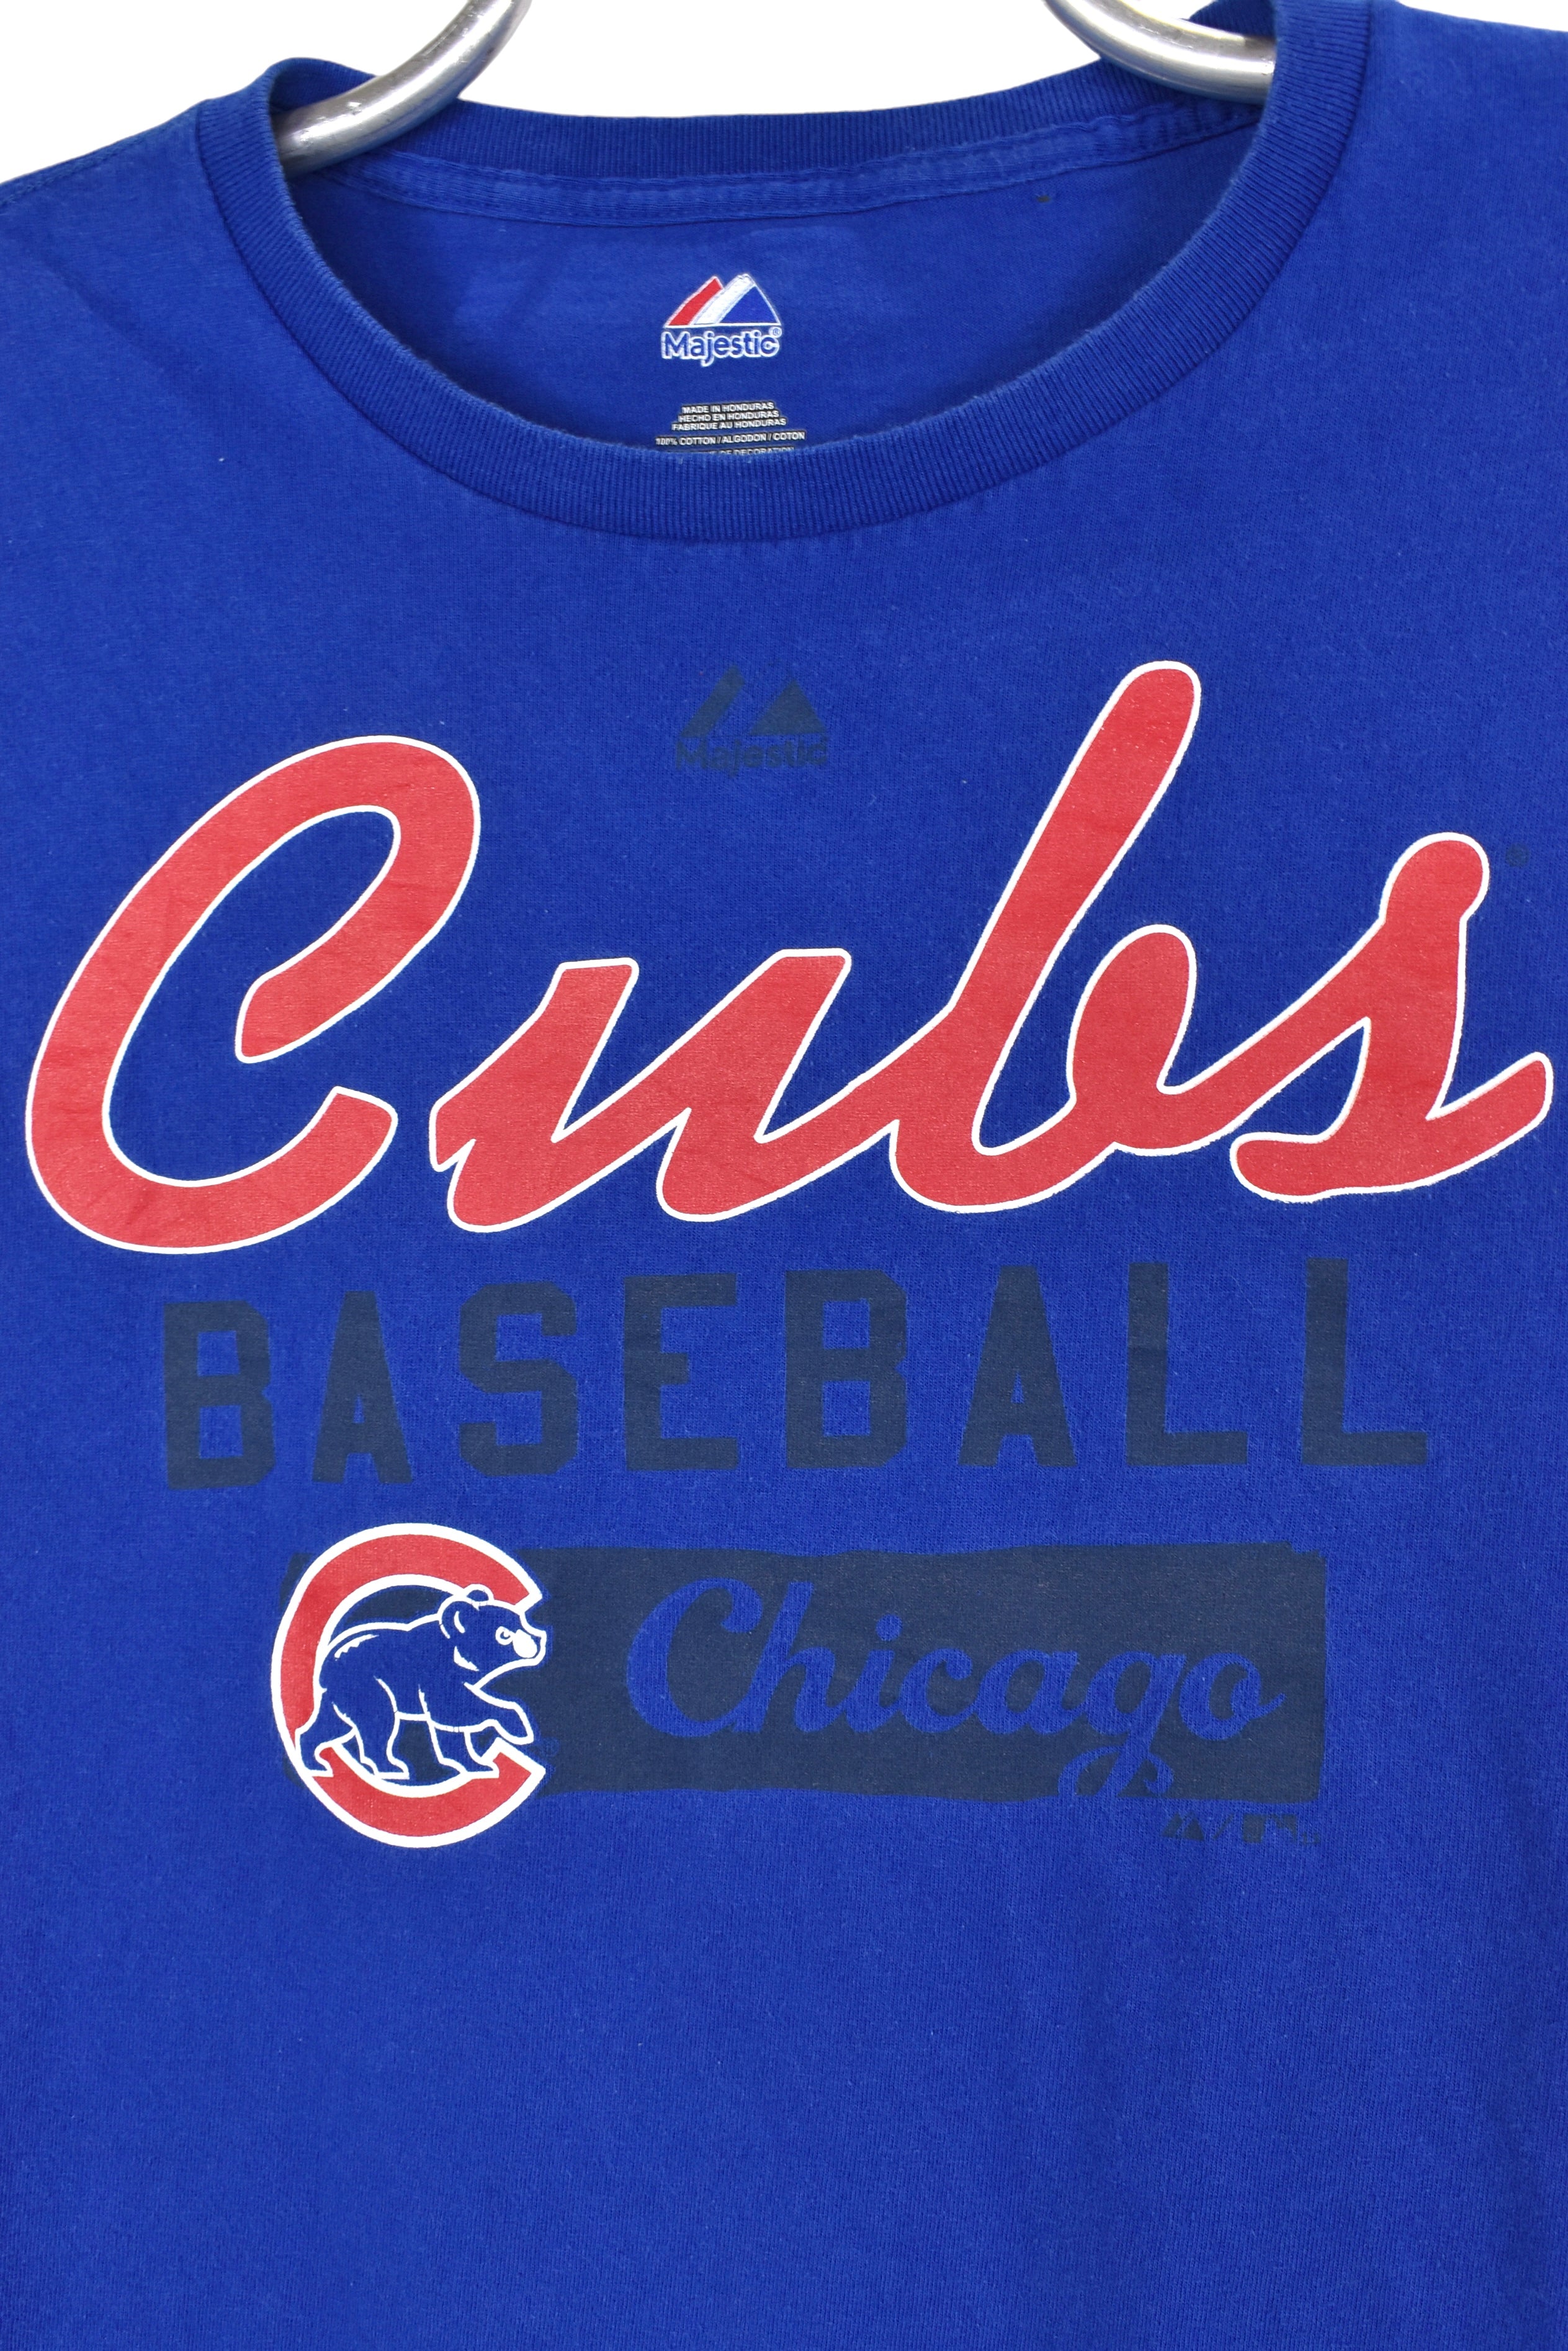 Modern Chicago Cubs shirt, MLB navy blue graphic tee - Large